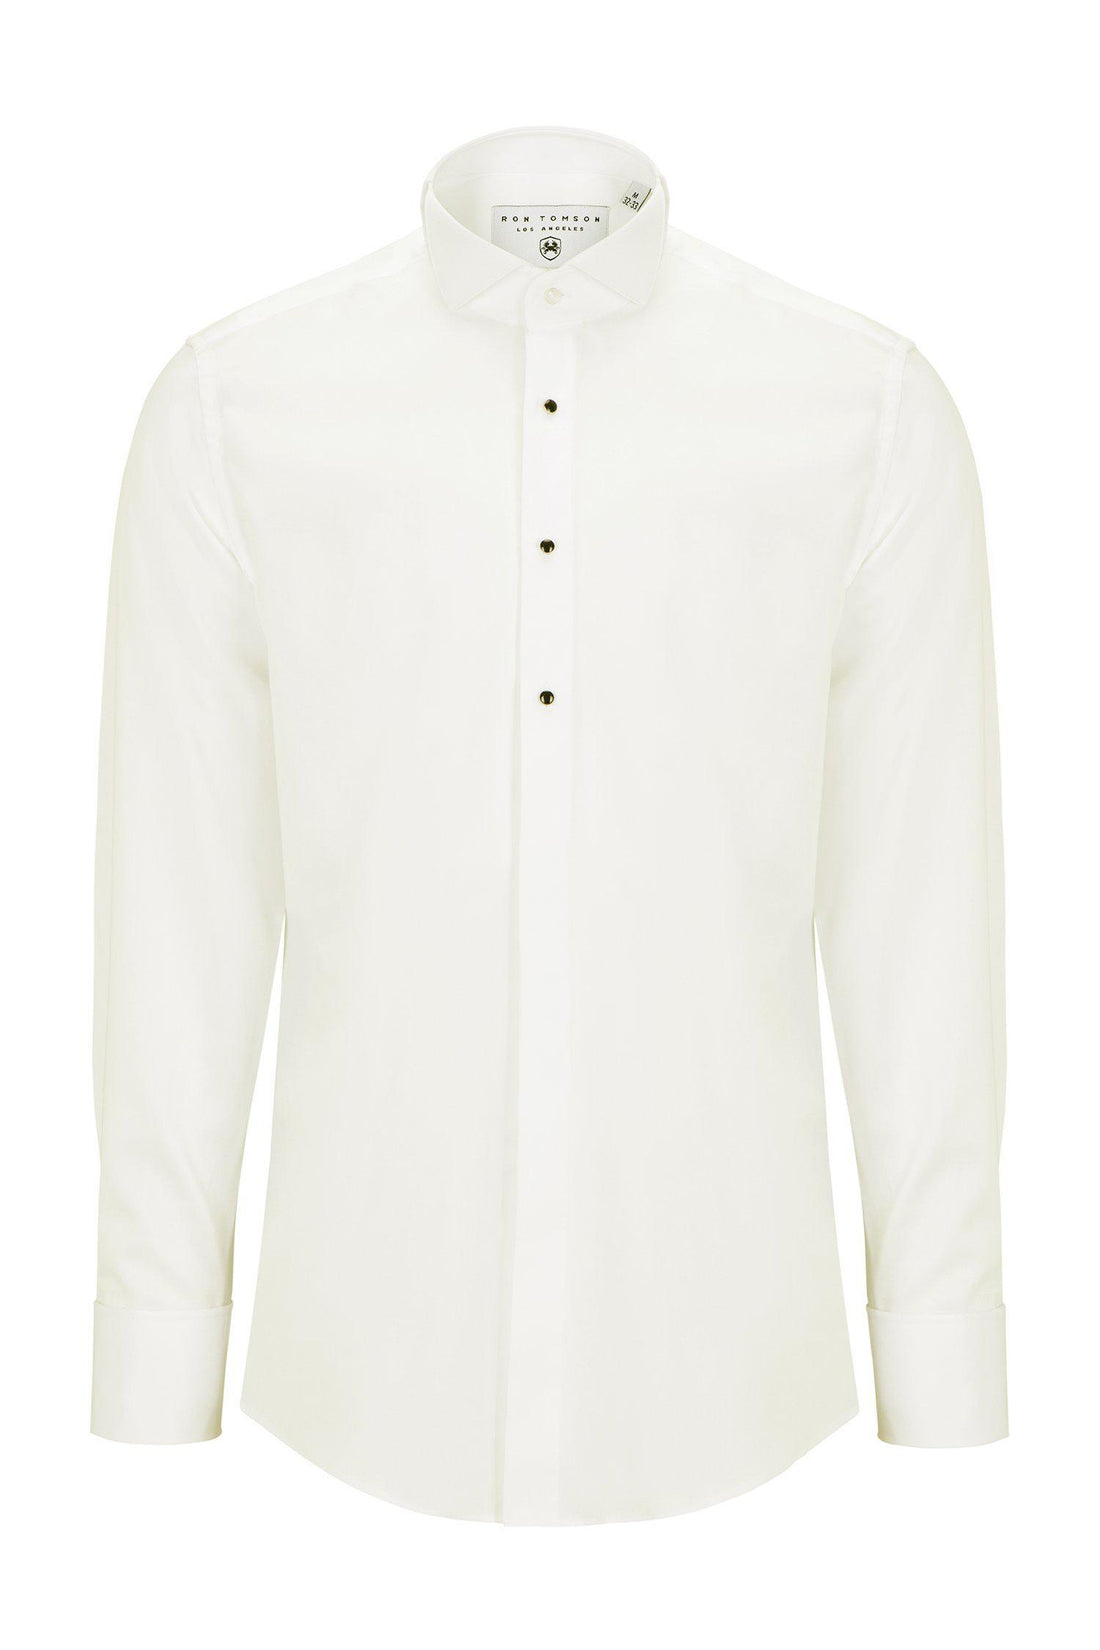 WING CLASSICAL TOP 3 FRONT STUD TUXEDO SHIRT - Light Beige - Ron Tomson